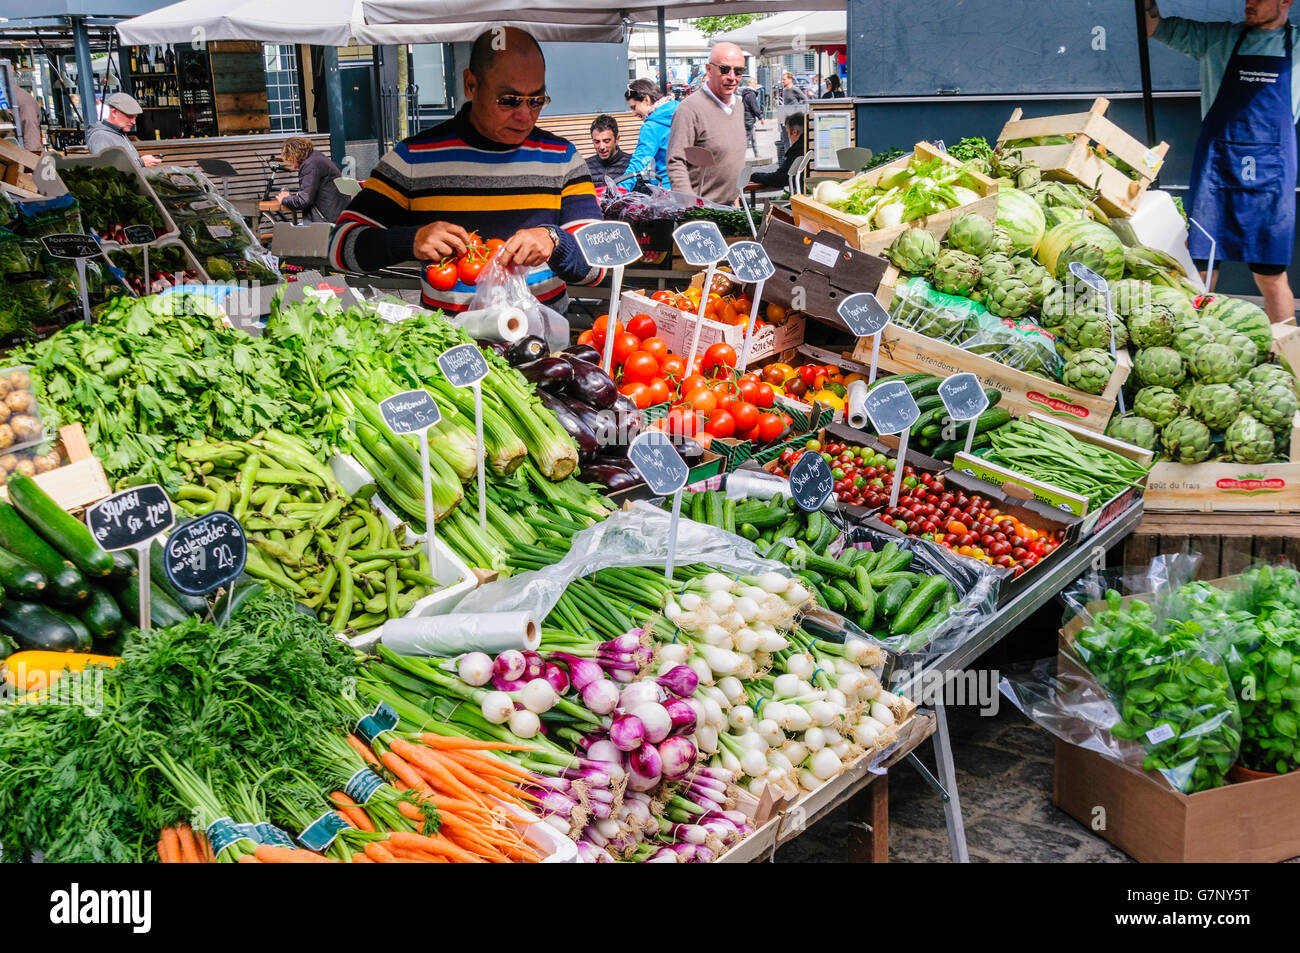 Vegetables for sale at an outdoor market stall Stock Photo